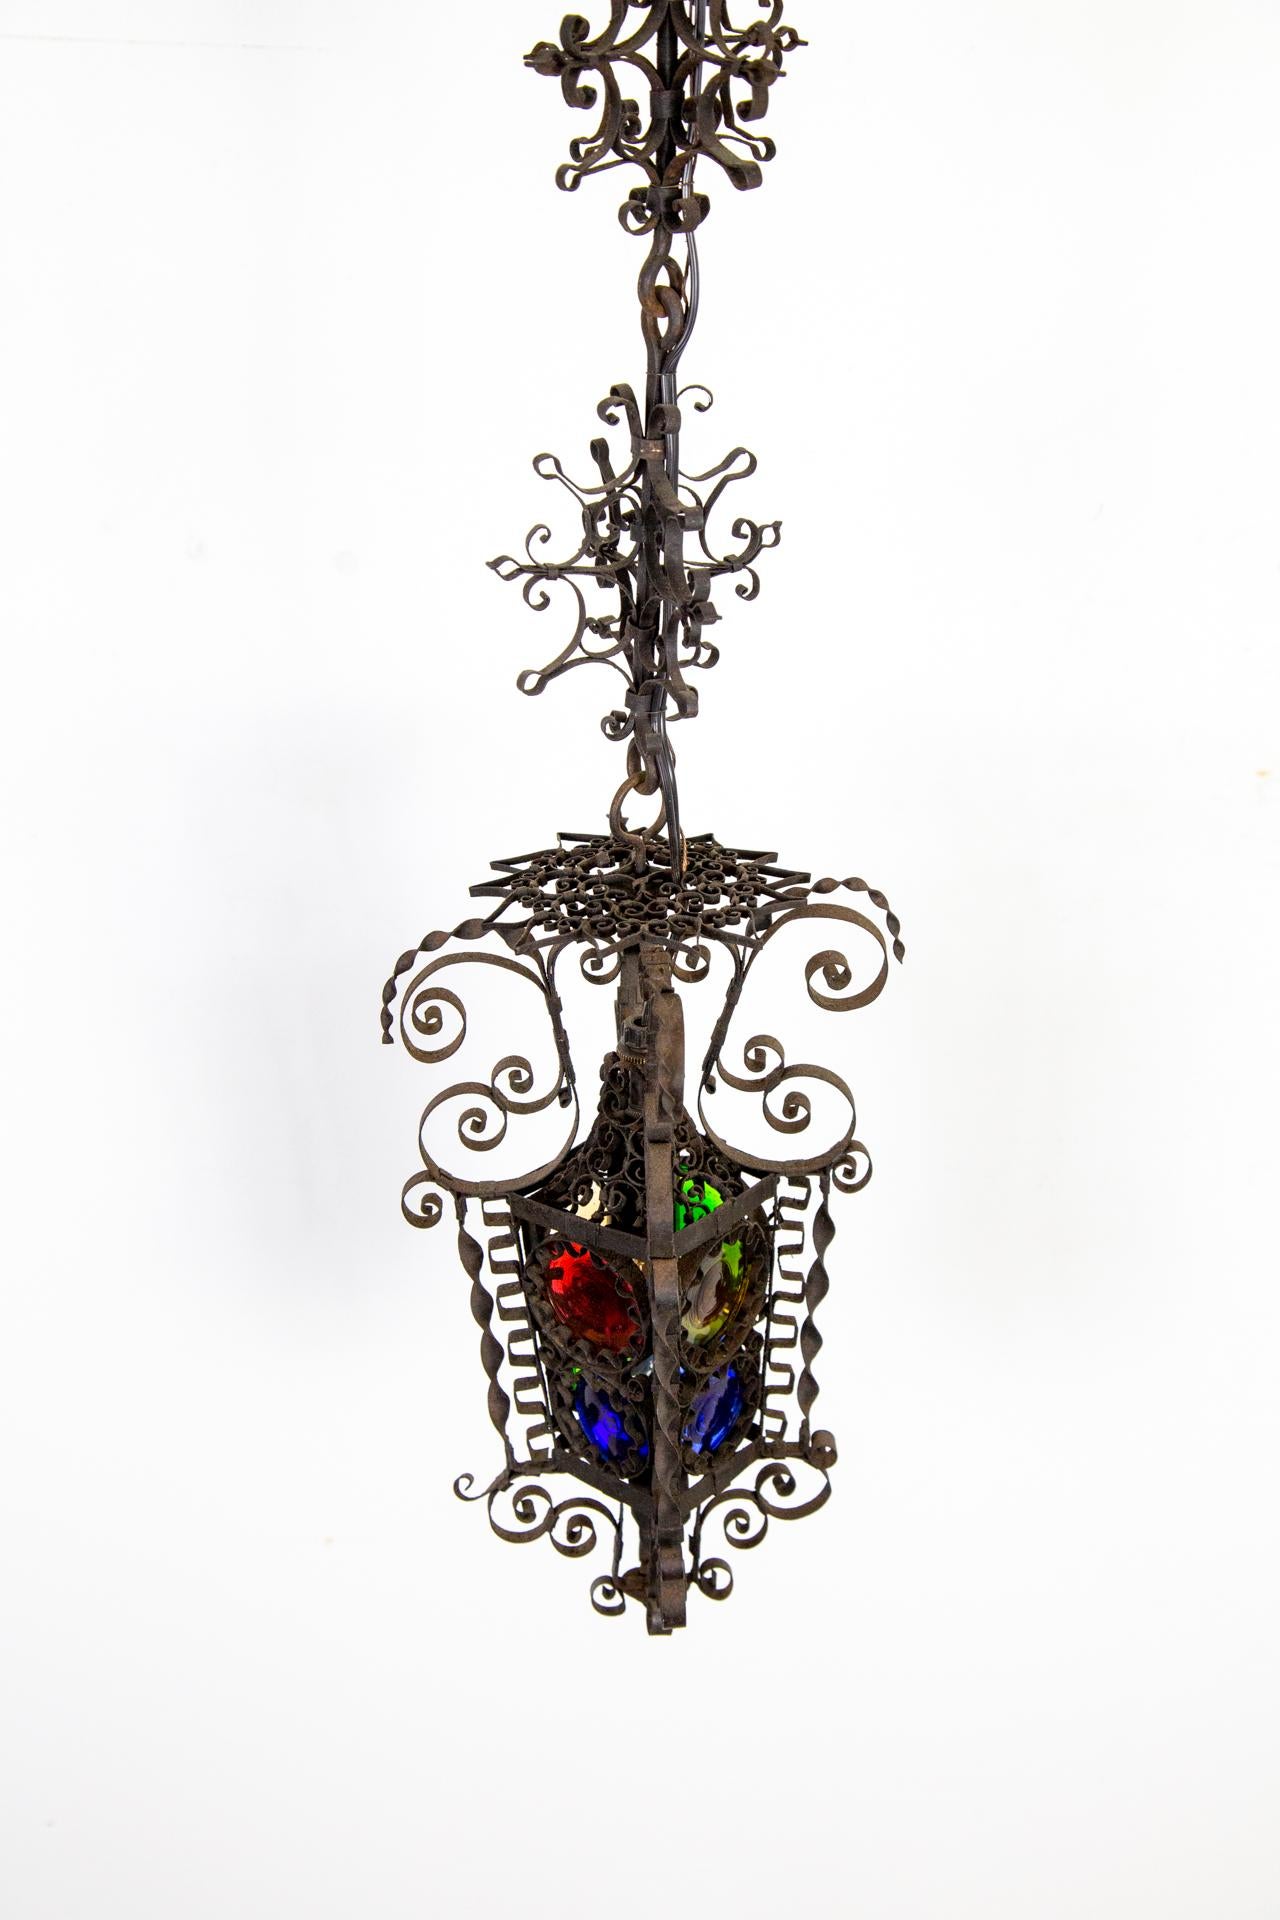 19th Century Black Filigree Iron Hanging Wall Lantern W/ Colored Glass For Sale 5